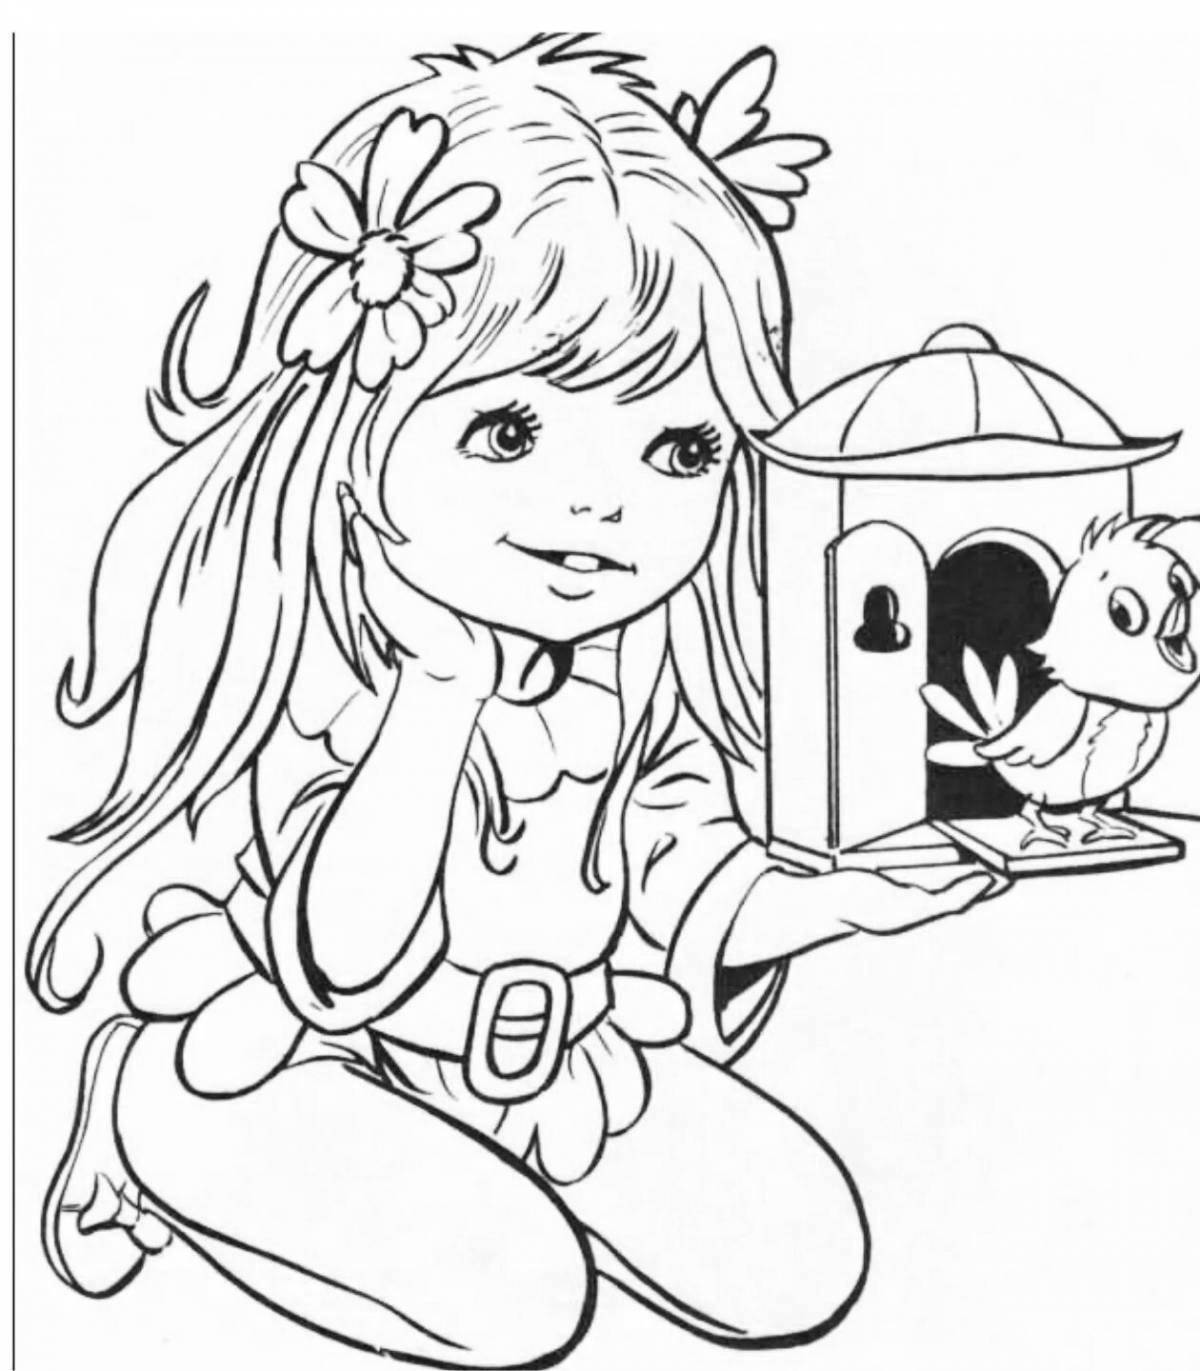 A wonderful coloring book for children 5 years old for girls